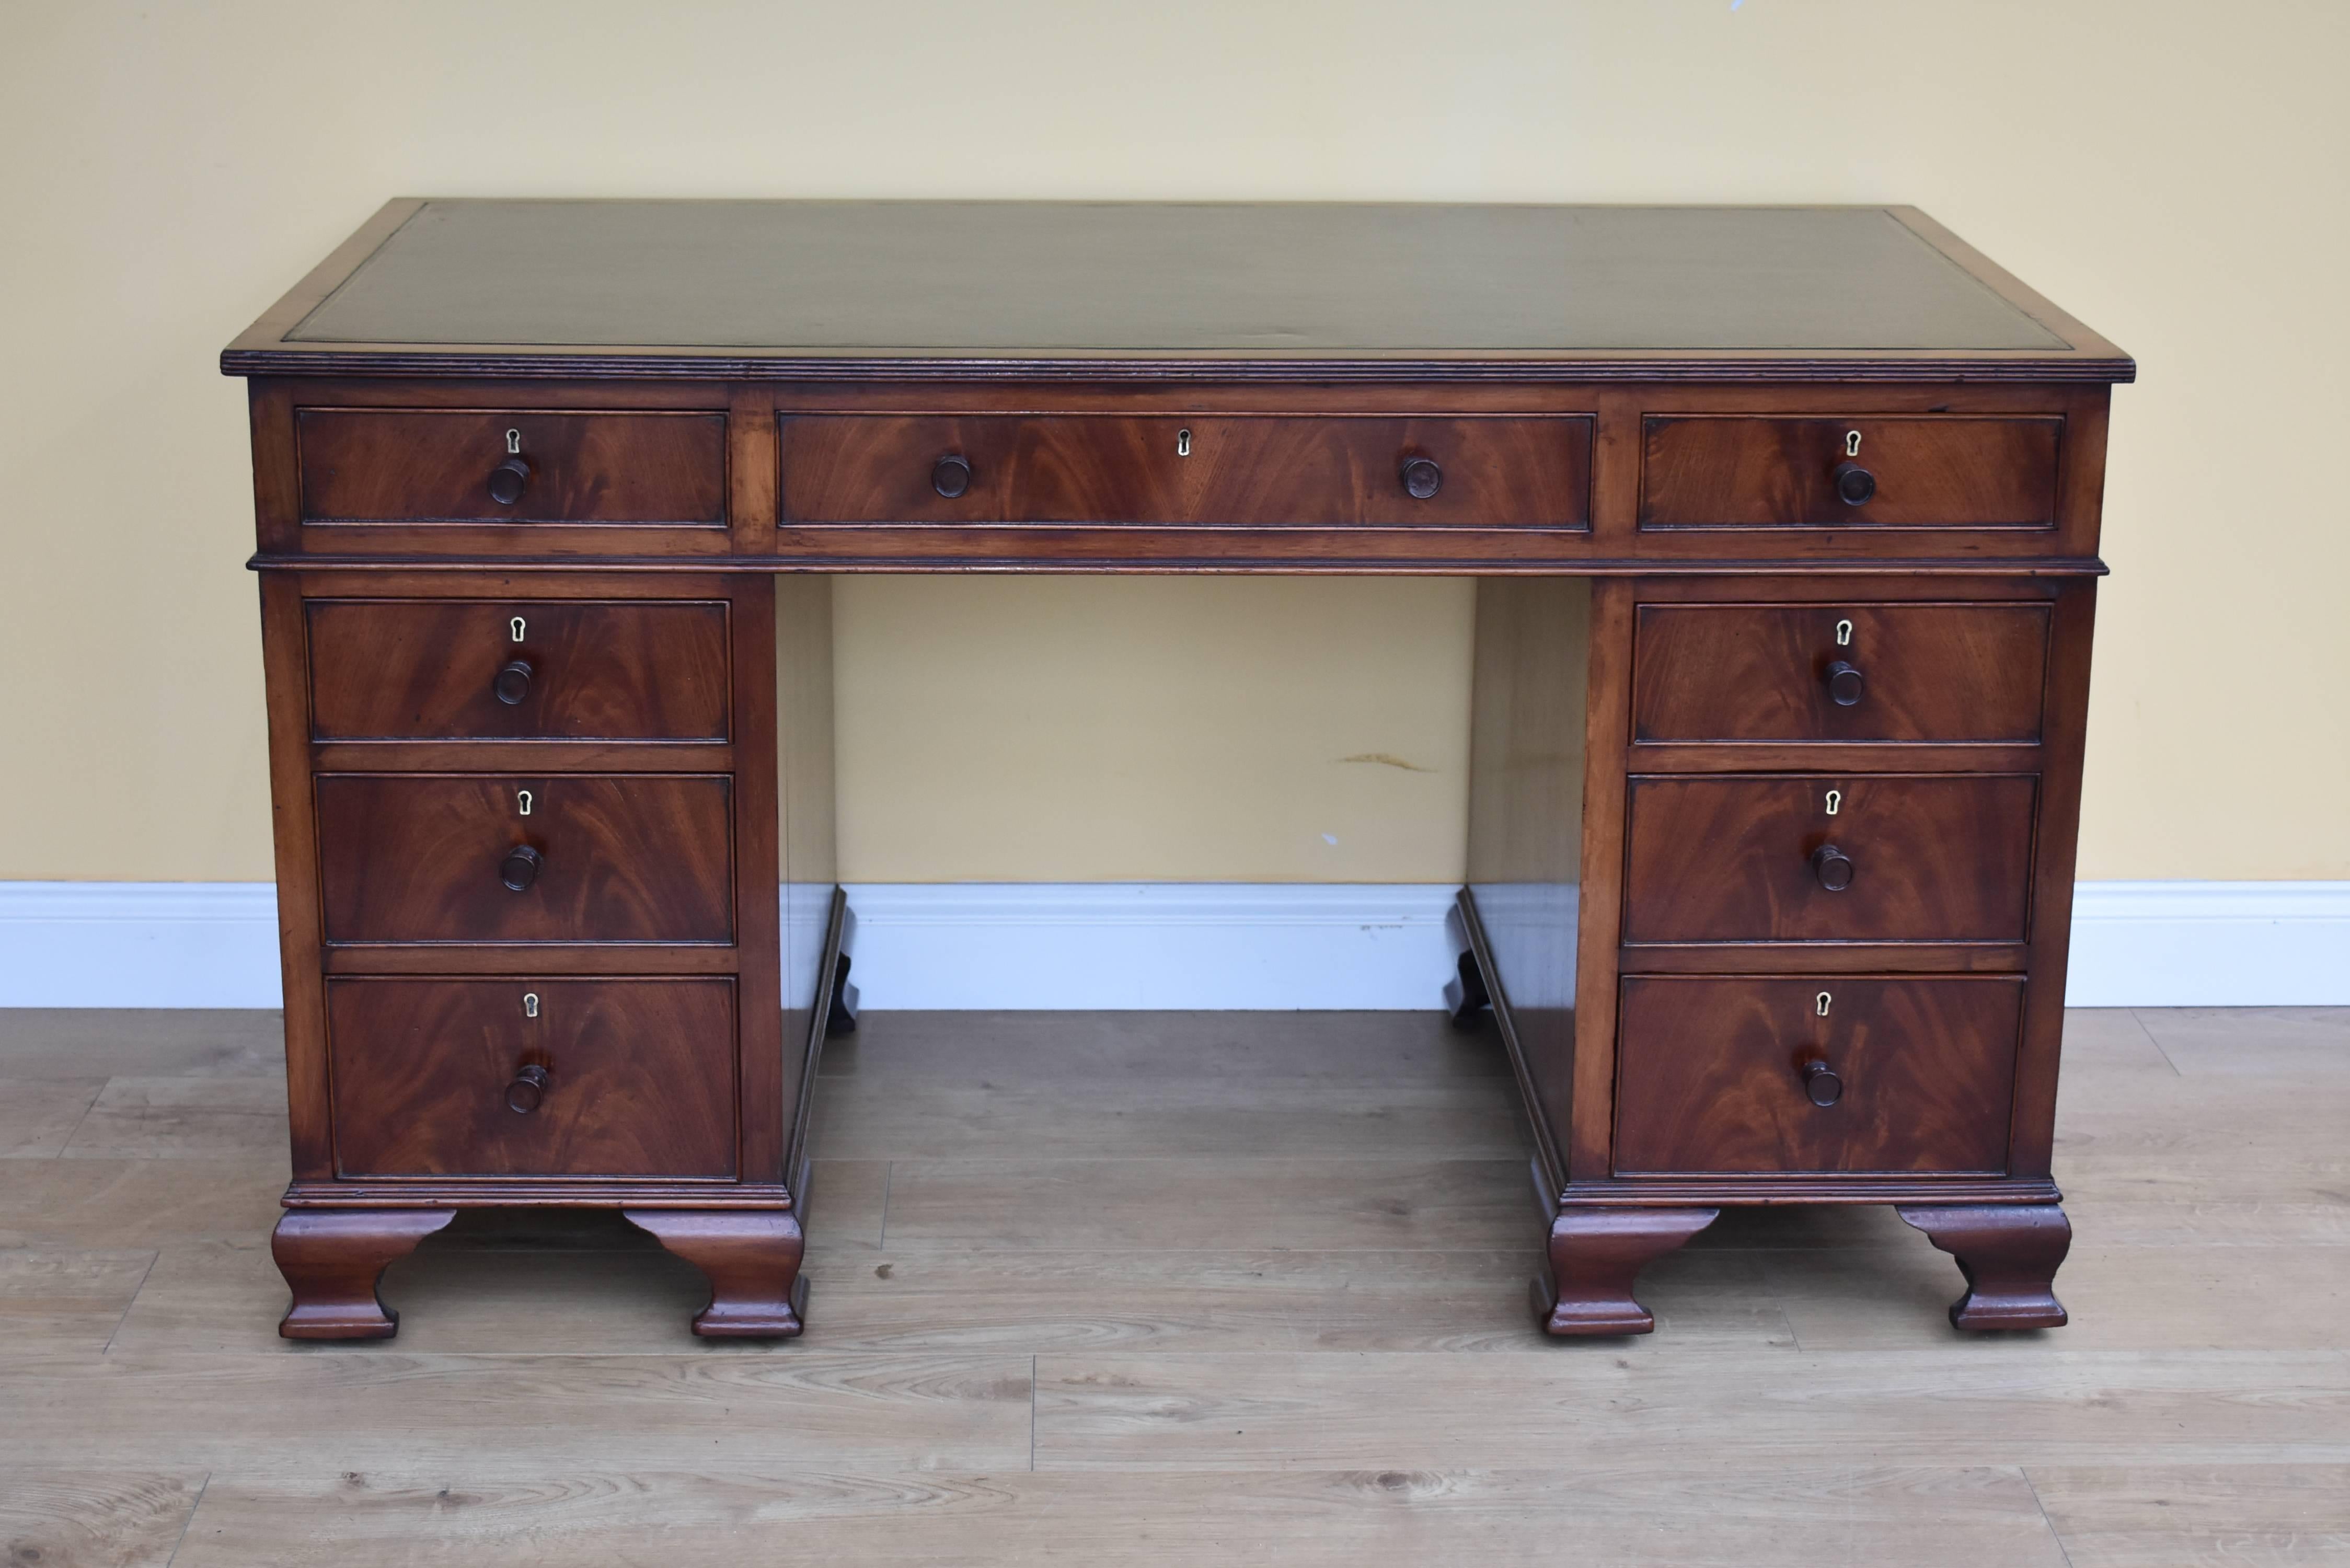 For sale is a good quality Edwardian mahogany pedestal desk. The top of the desk has a black writing surface, with gold line tooling, above three drawers in the top. The top fits onto two pedestals, each with brass escutcheons and turned handles,